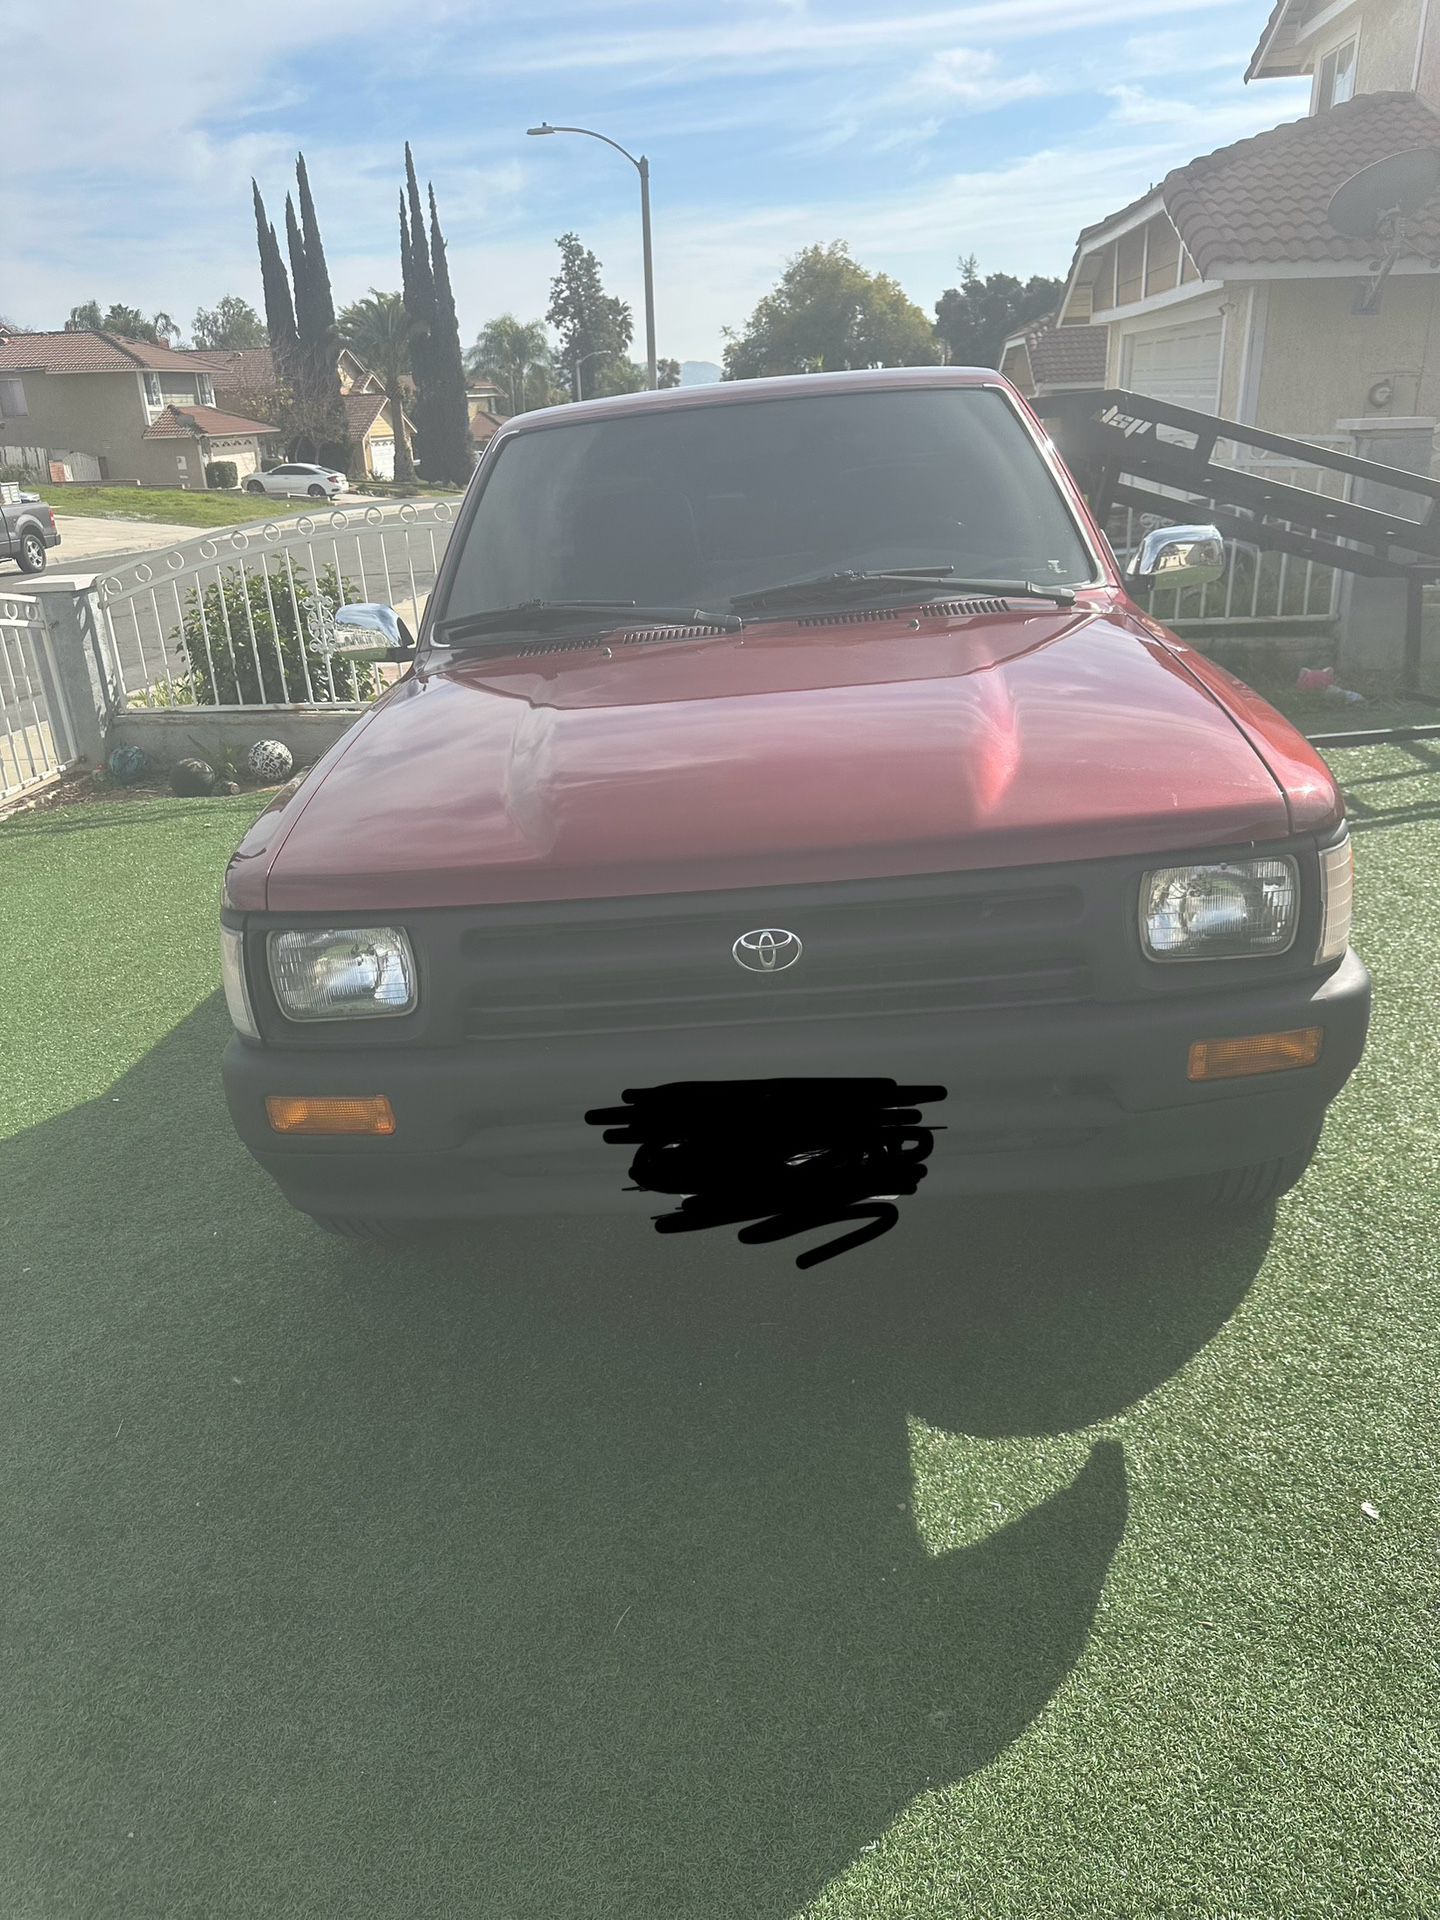 Grill, bumper, valance, rim with tires for 92 Toyota pickup